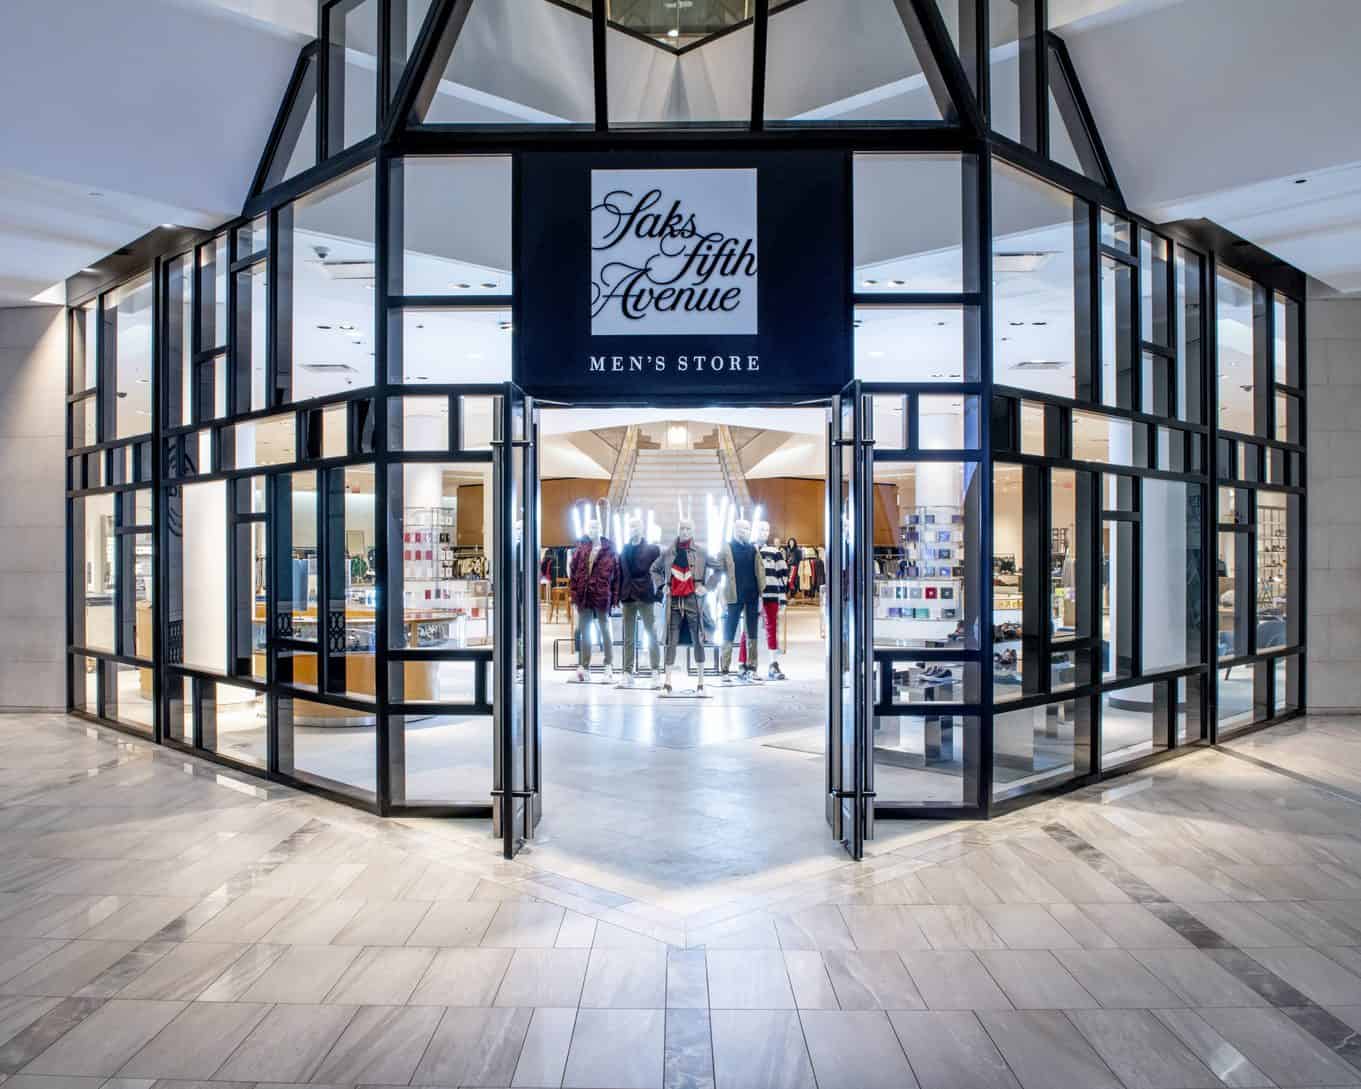 SAKS FIFTH AVENUE OFF 5TH AT THE COLONNADE OUTLETS